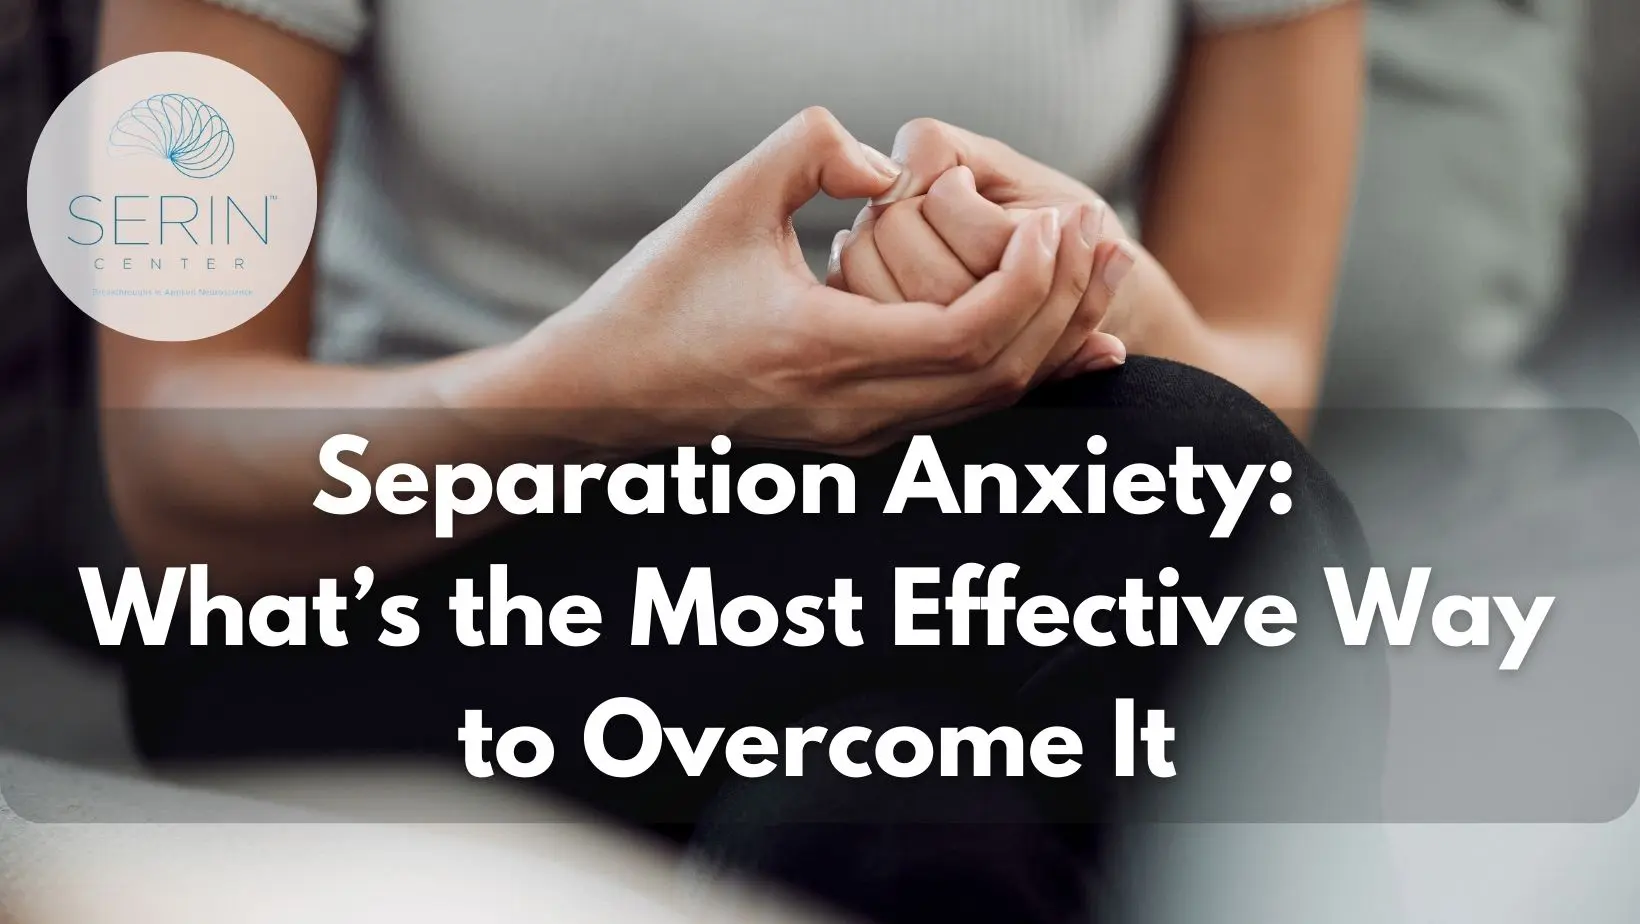 Overcoming Separation Anxiety - Serin Center